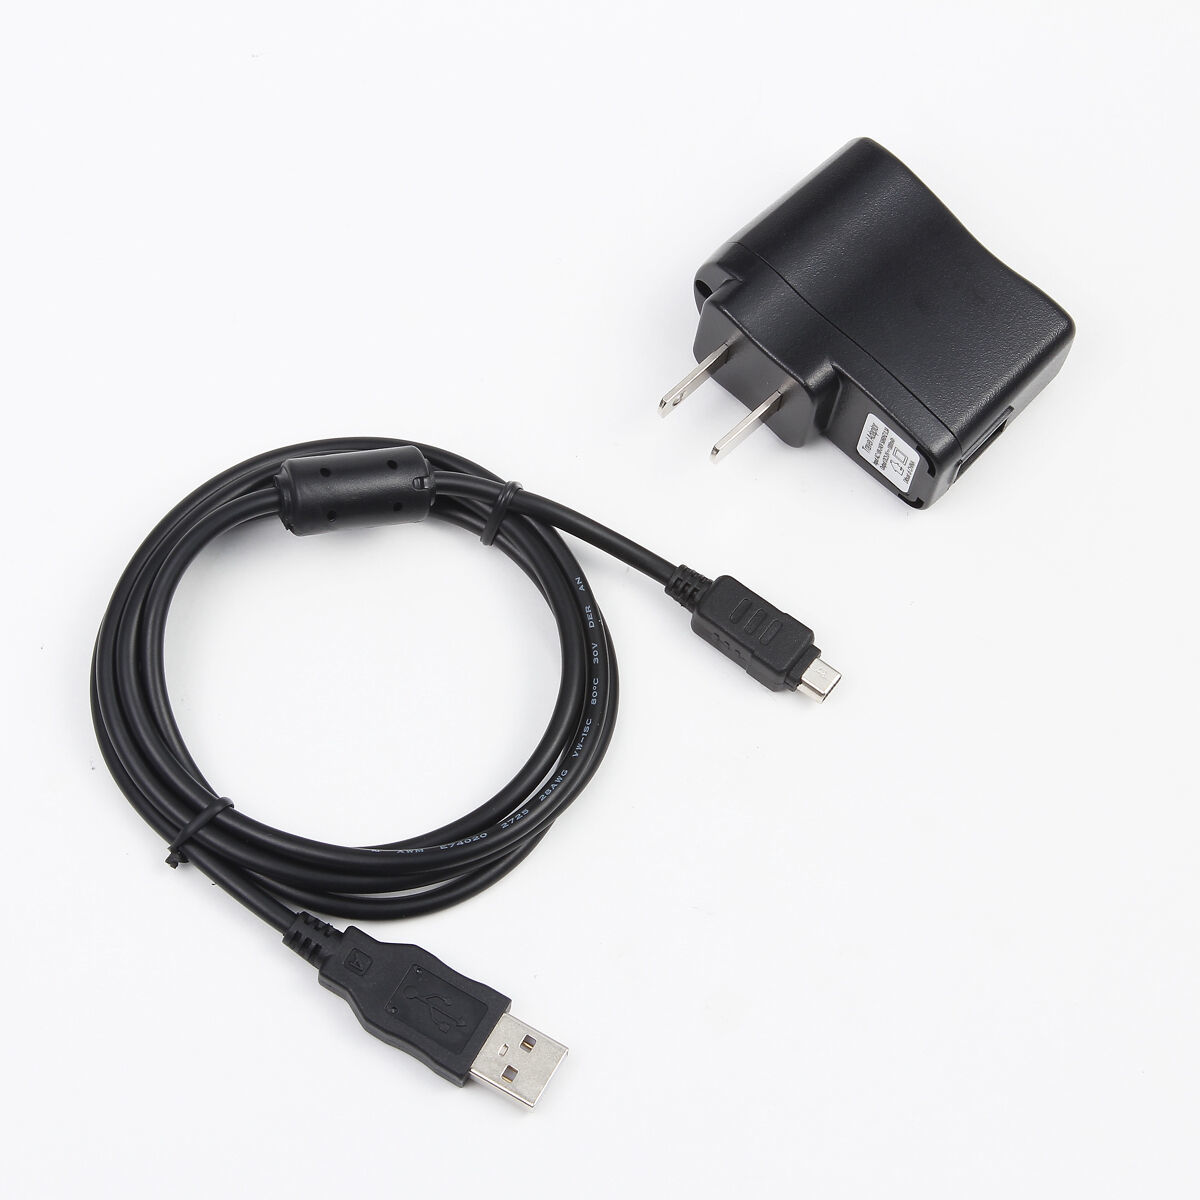 Usb Ac Power Adapter Charger Cord For Olympus Sz-20 Tg-830 6010 6020 7040 Camera - $20.15